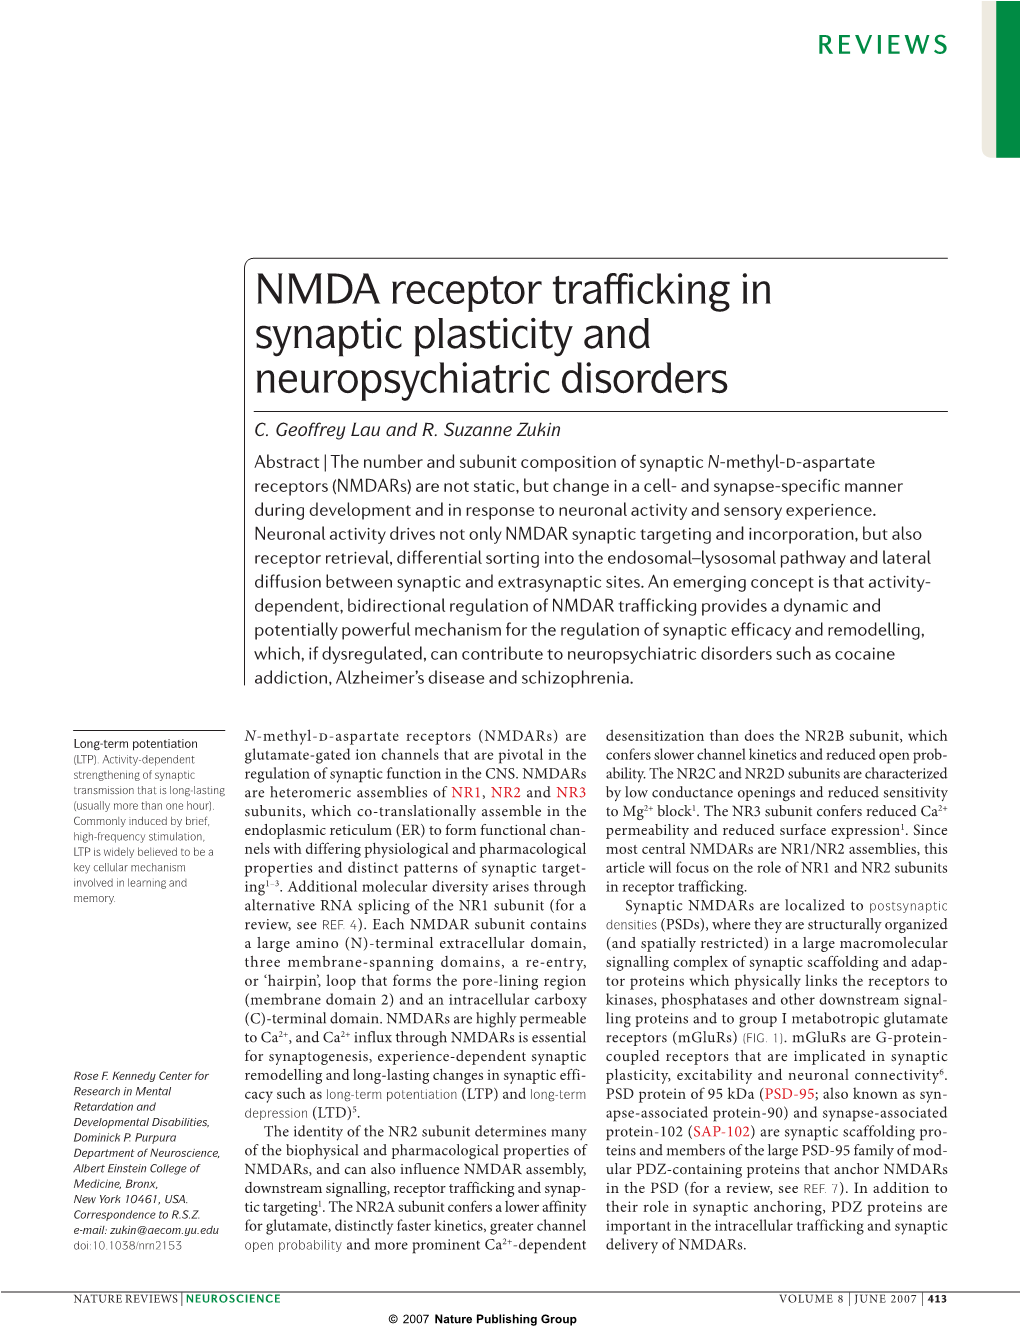 NMDA Receptor Trafficking in Synaptic Plasticity and Neuropsychiatric Disorders